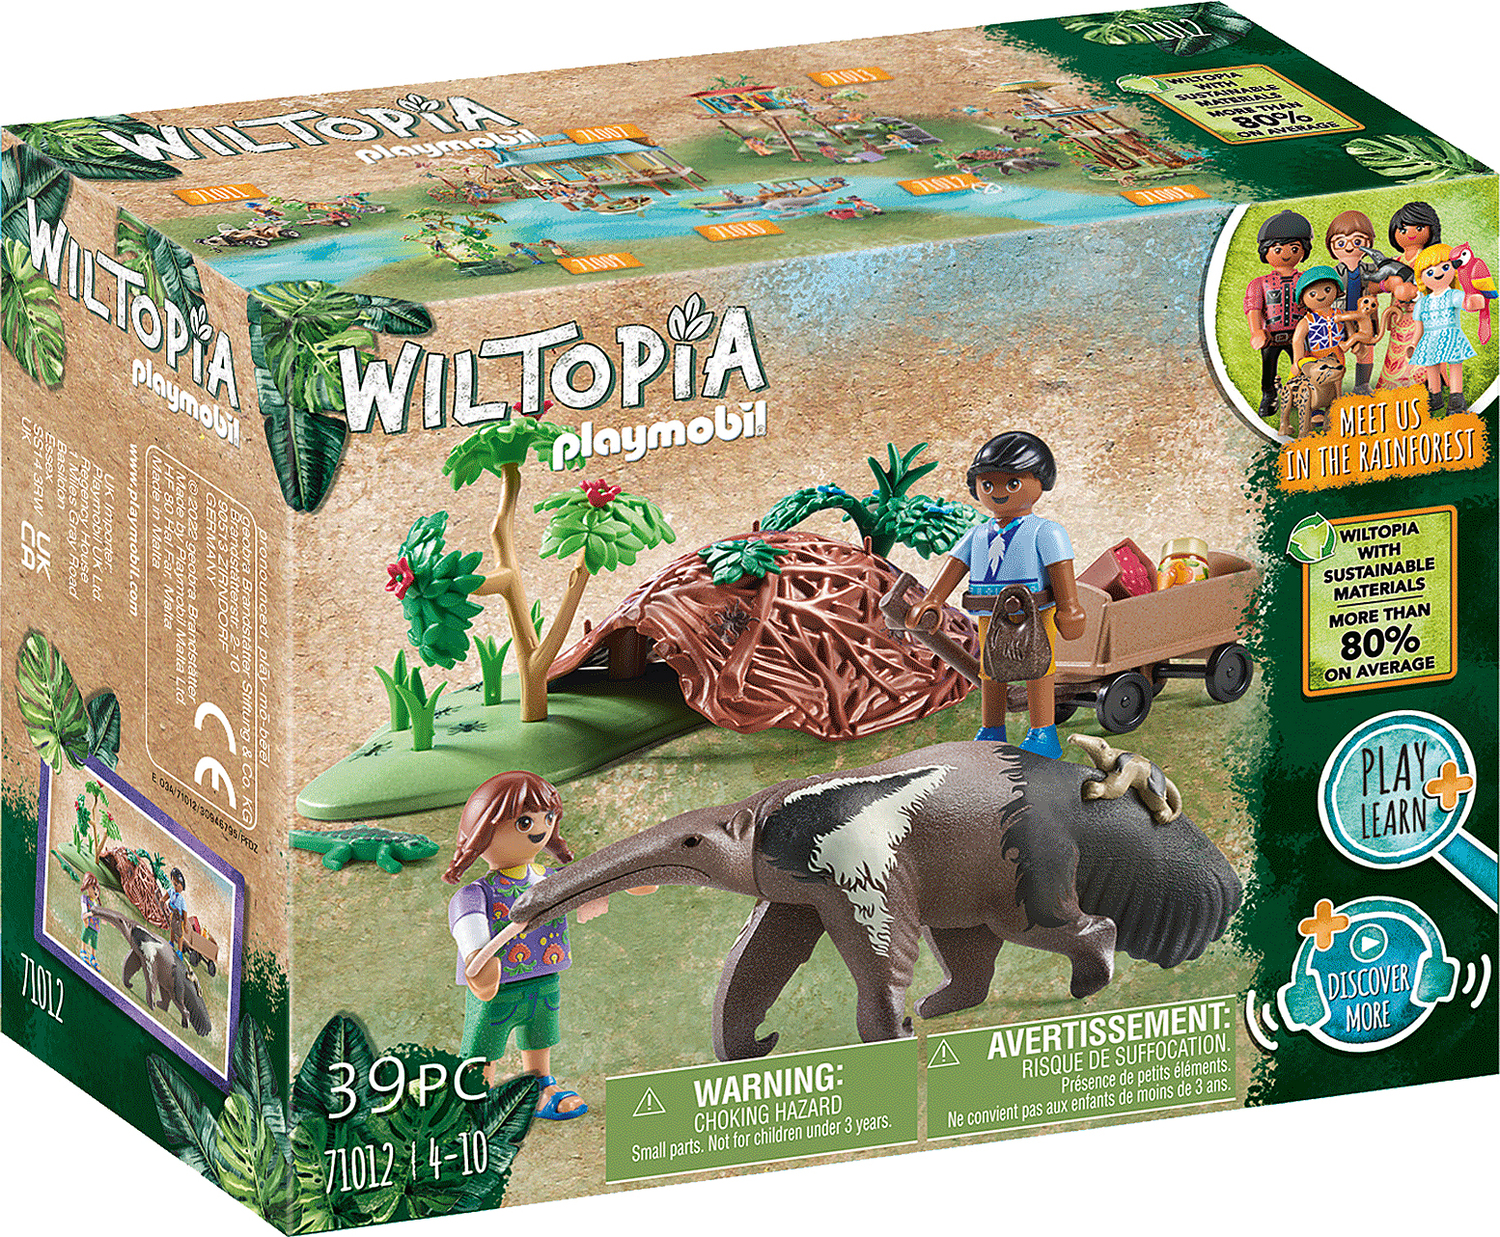 Playmobil - Wiltopia - Research Tower with Compass